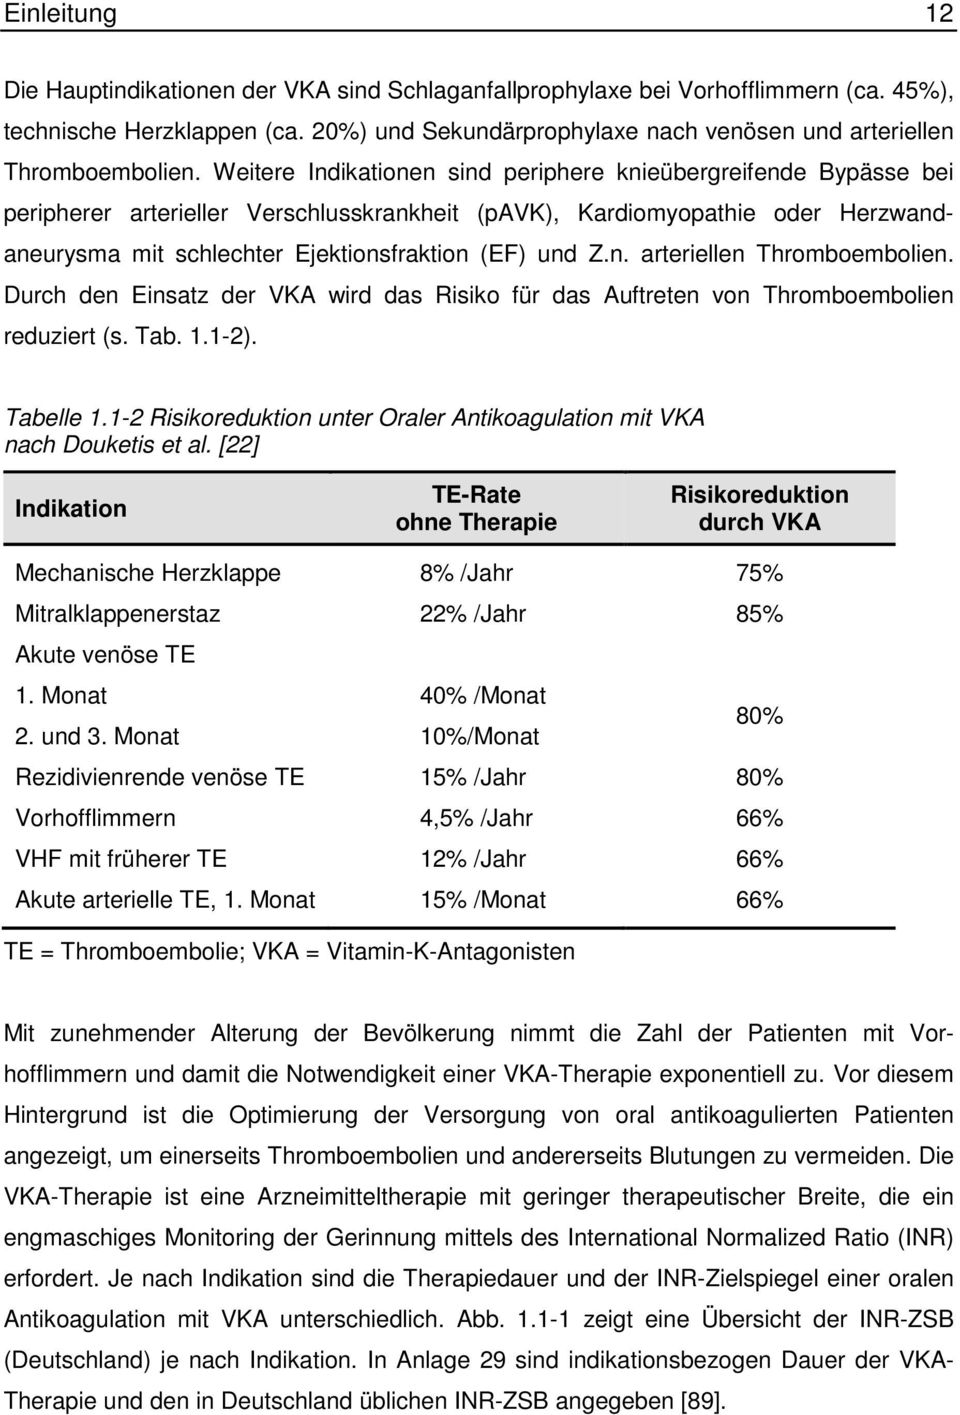 Falithrom Notfallausweis : Falithrom Notfallausweis / Falithrom ist in vielen ...